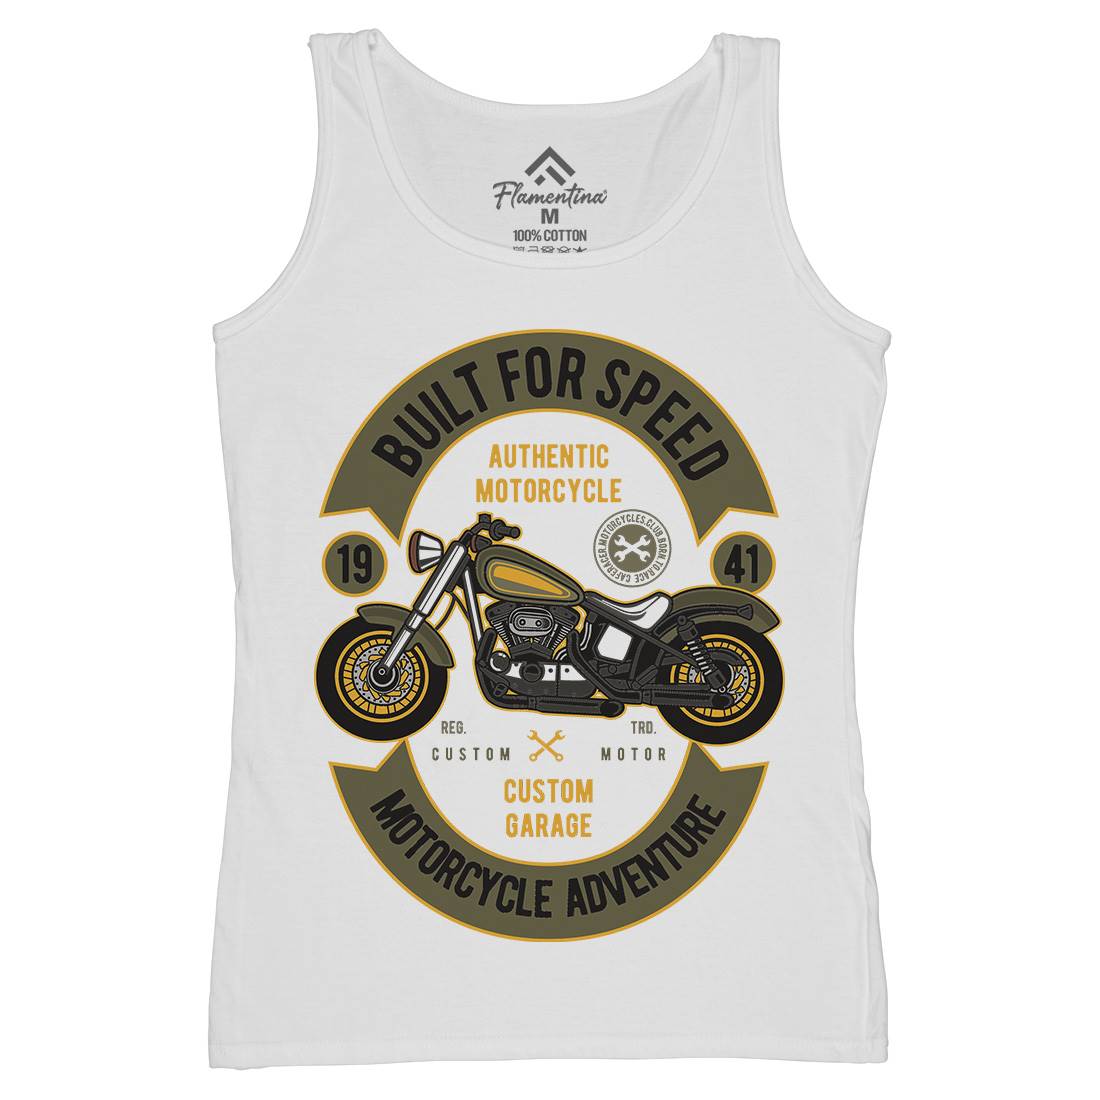 Built For Speed Womens Organic Tank Top Vest Motorcycles D512